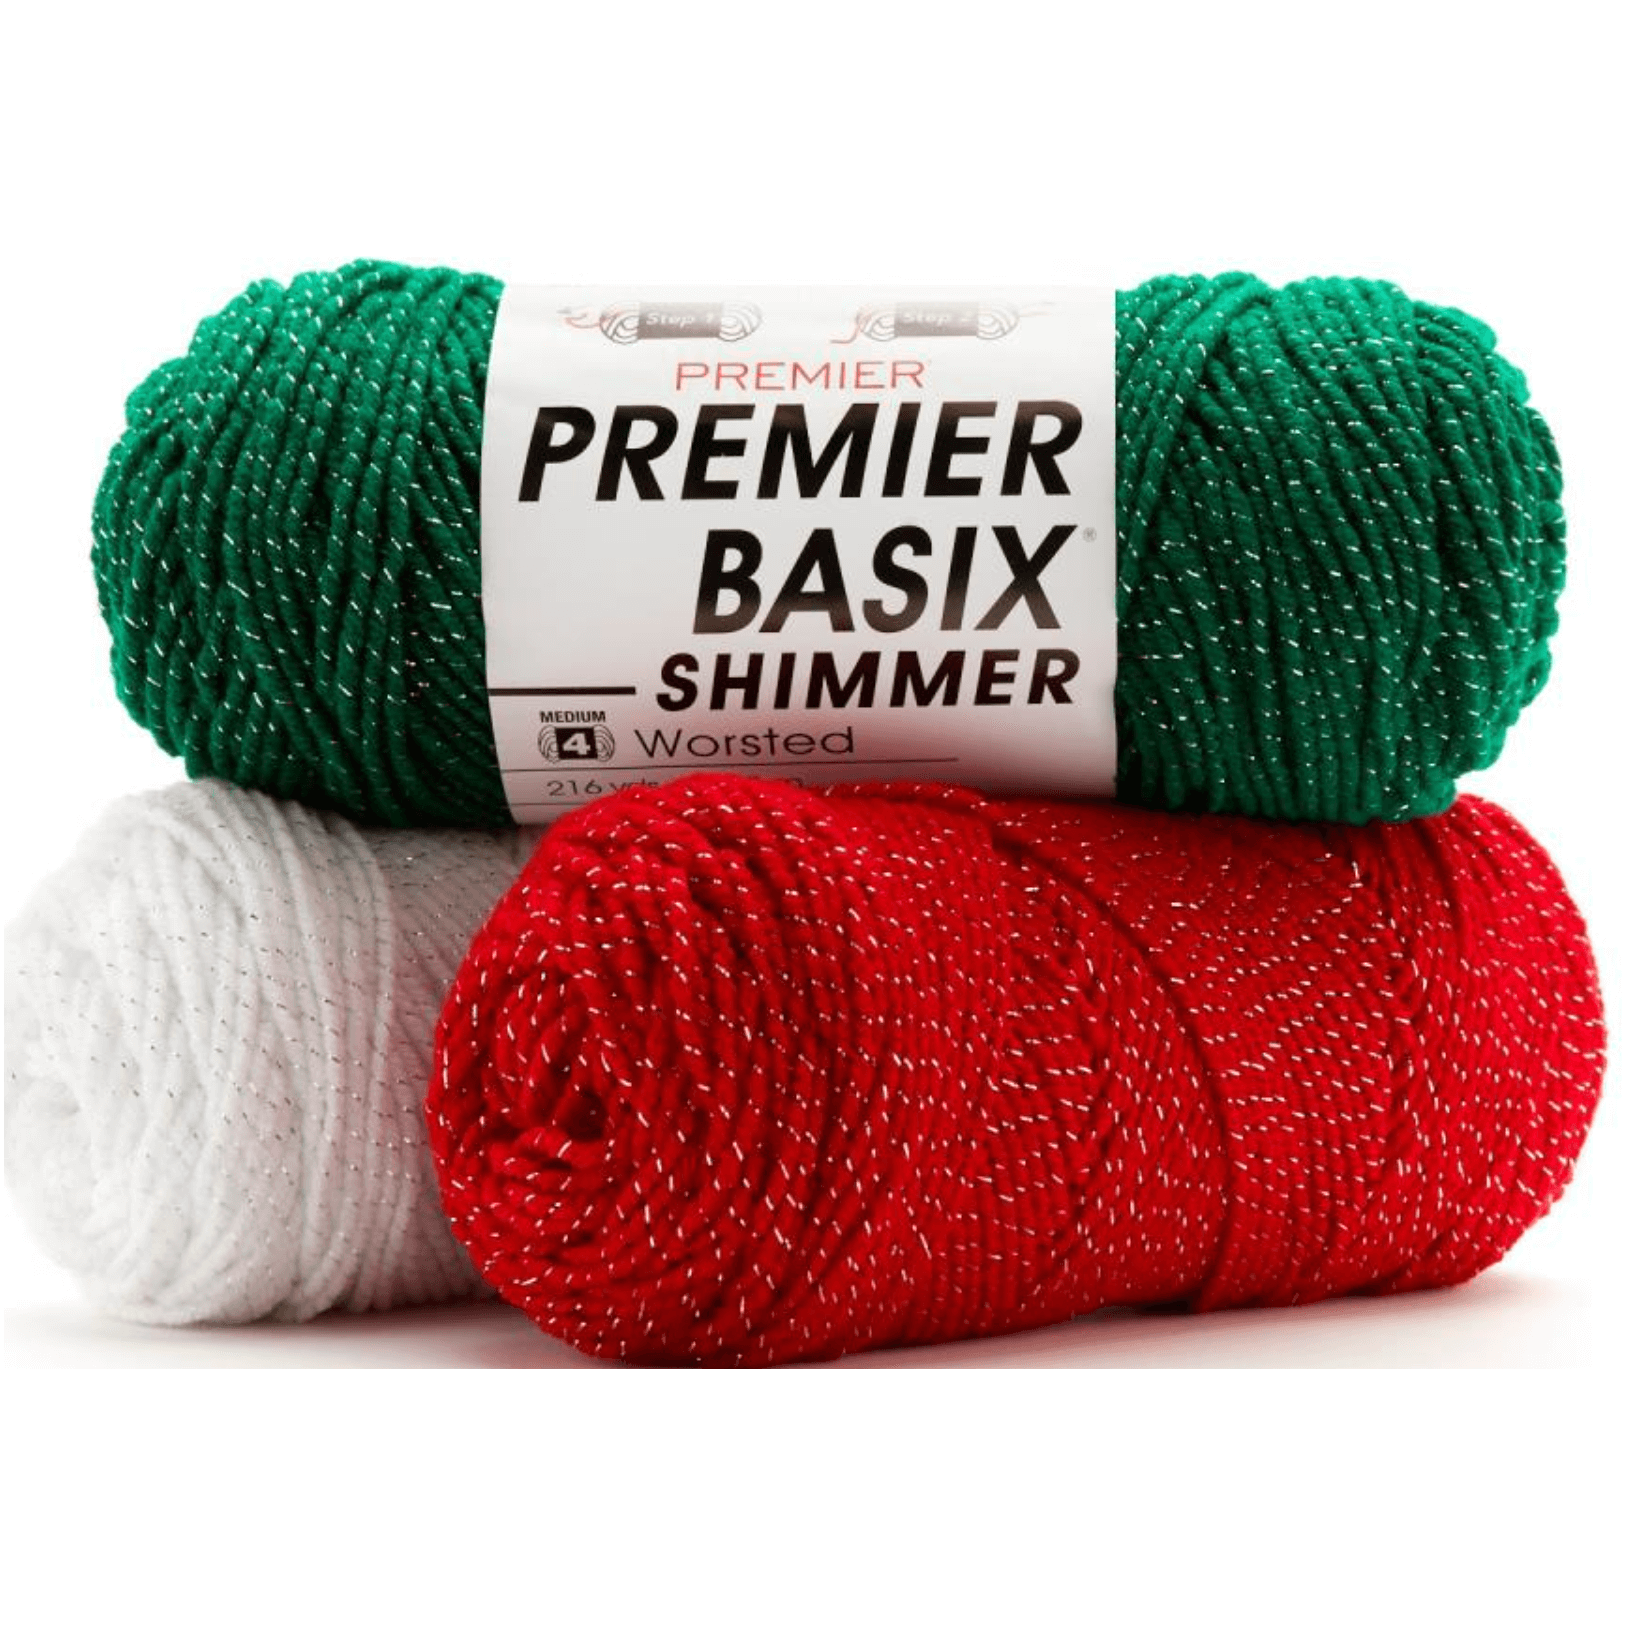 Premier Basix Shimmer Sold As A 3 Pack